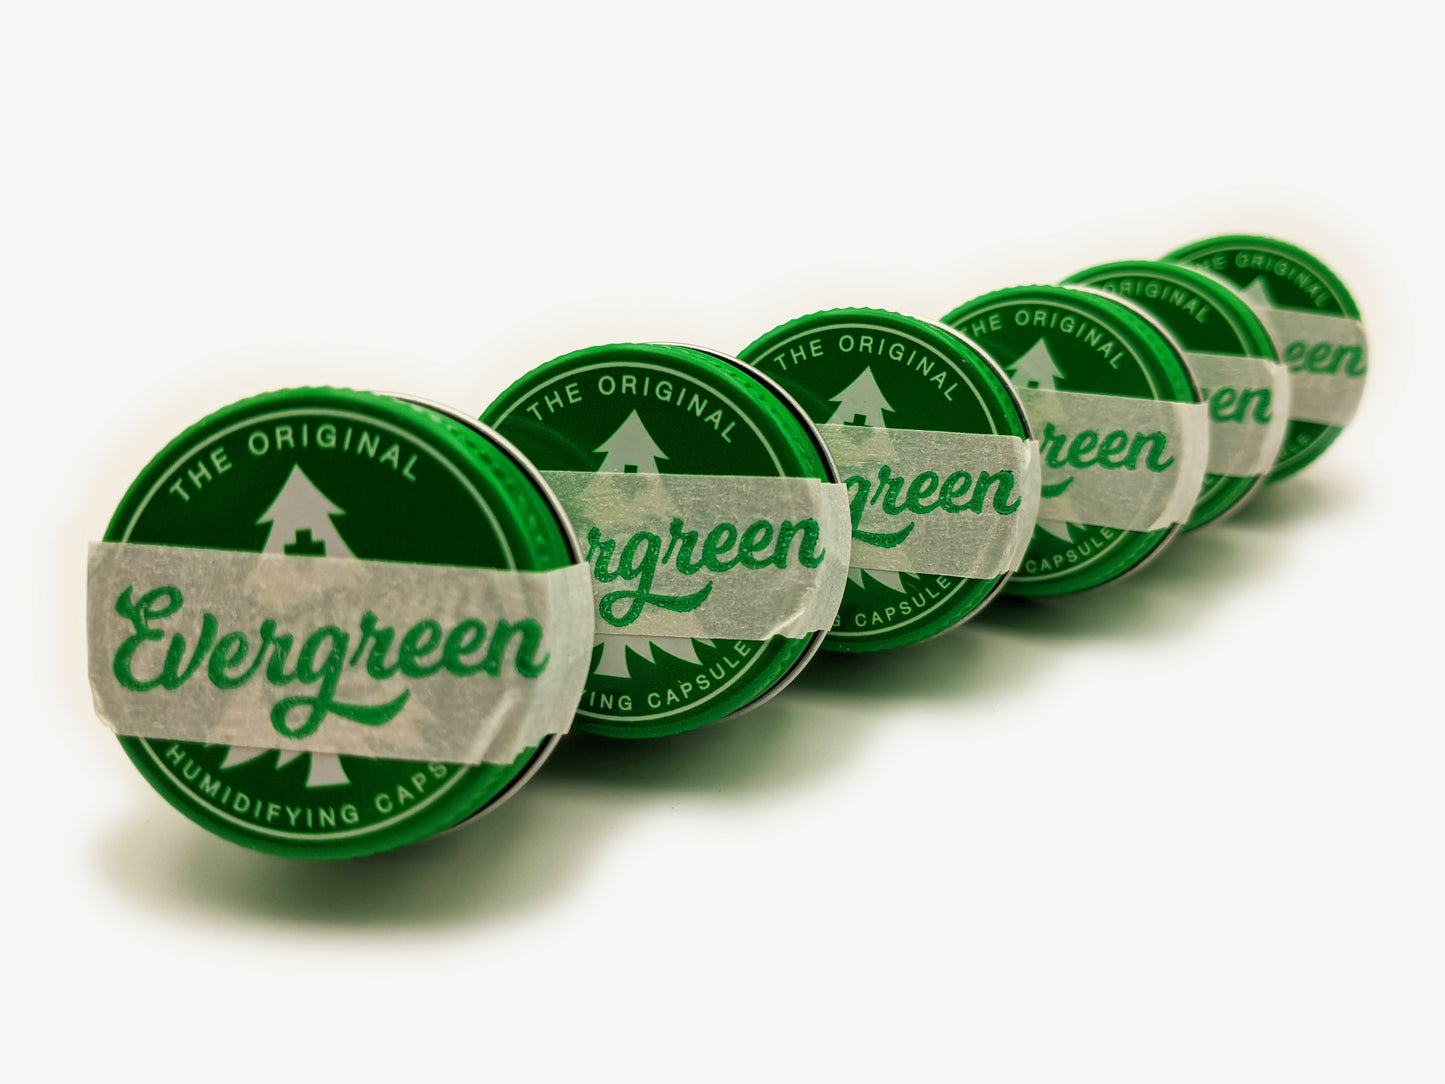 Evergreen Pod six pack no packaging no instructions